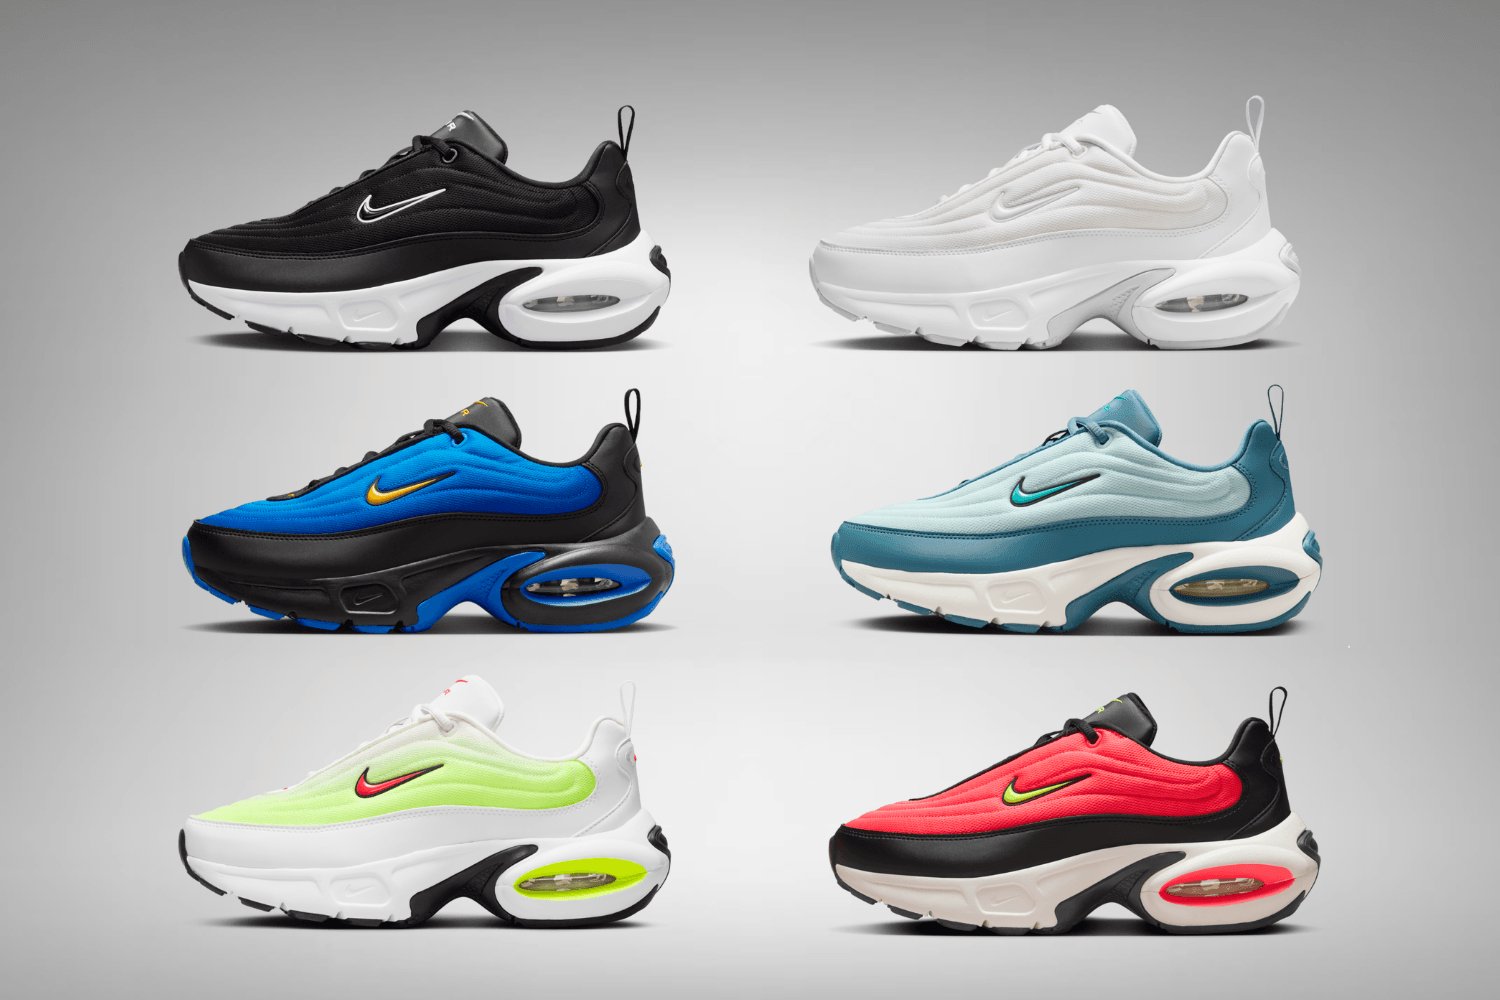 Nike introduces the Air Max Portal especially for womens